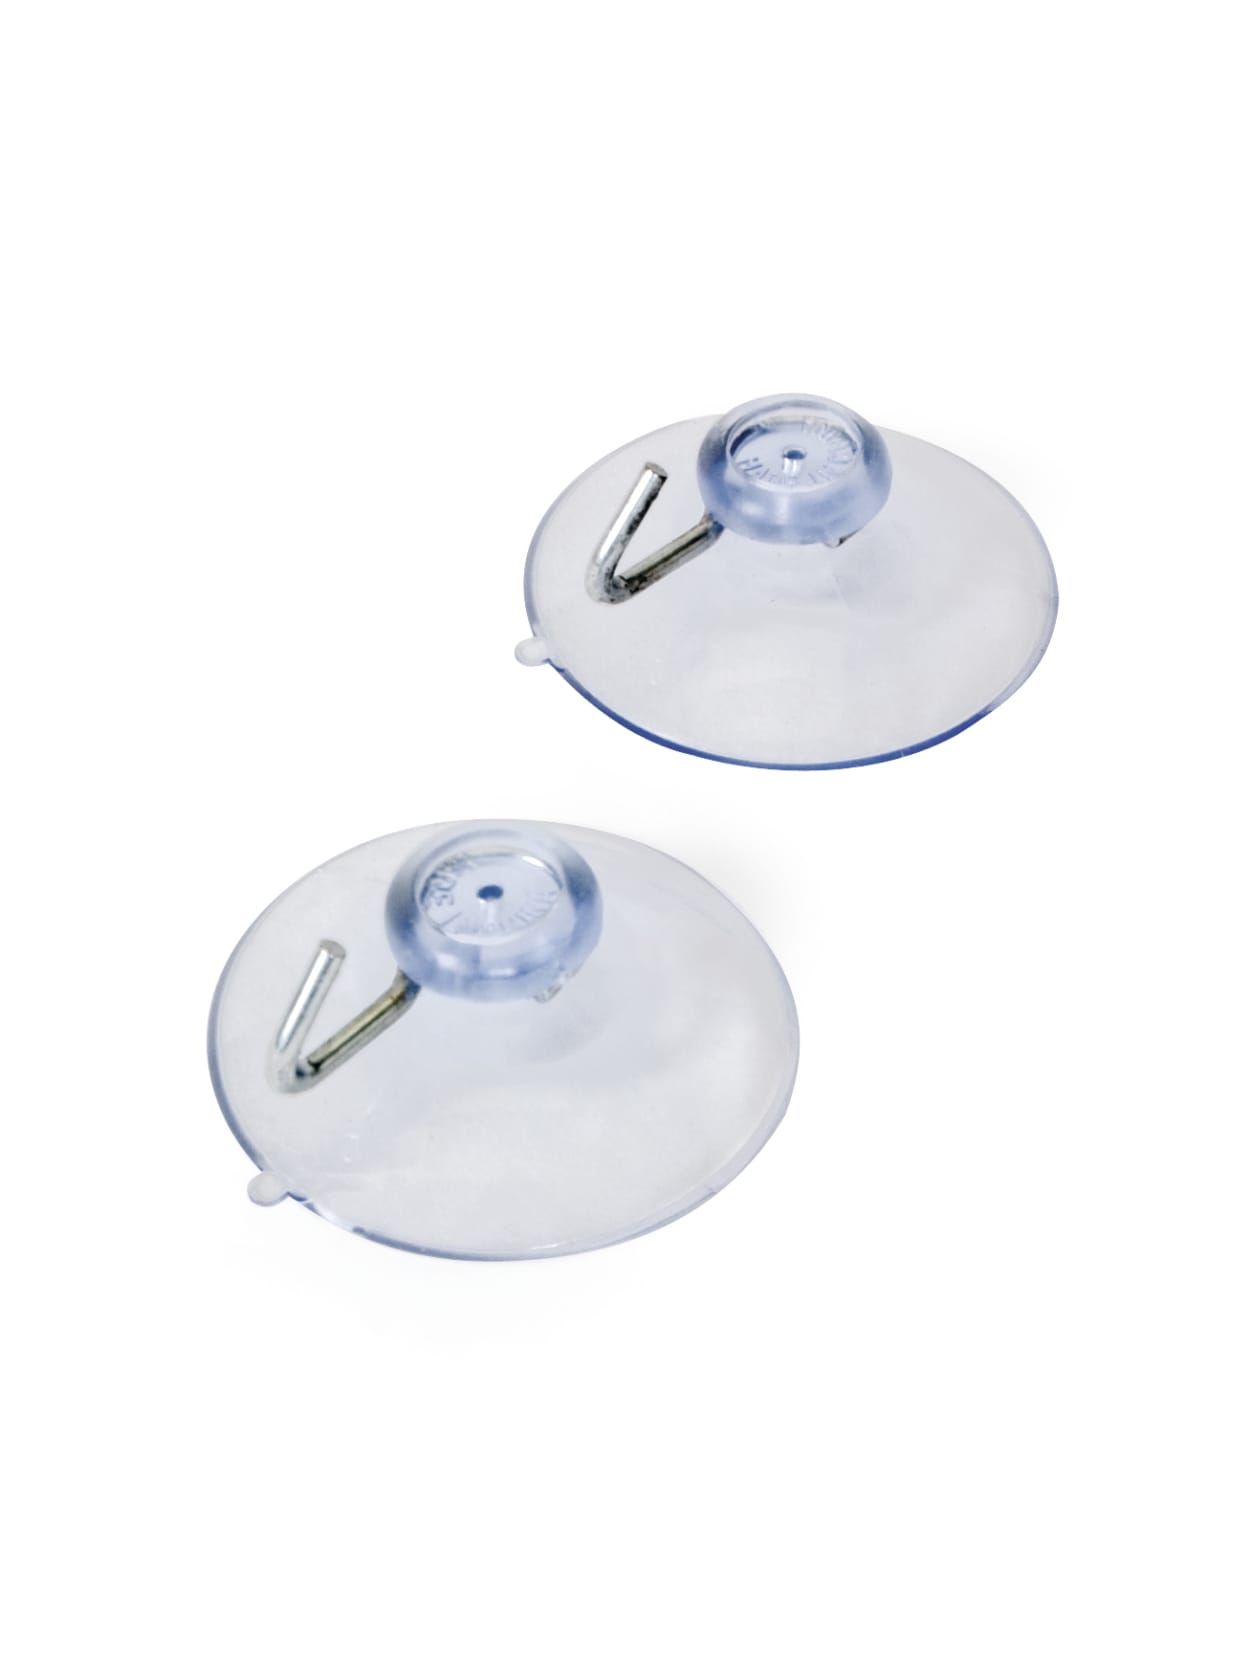 Suction Cups Discount, 59% OFF | www.oldtrianglesydneyns.com